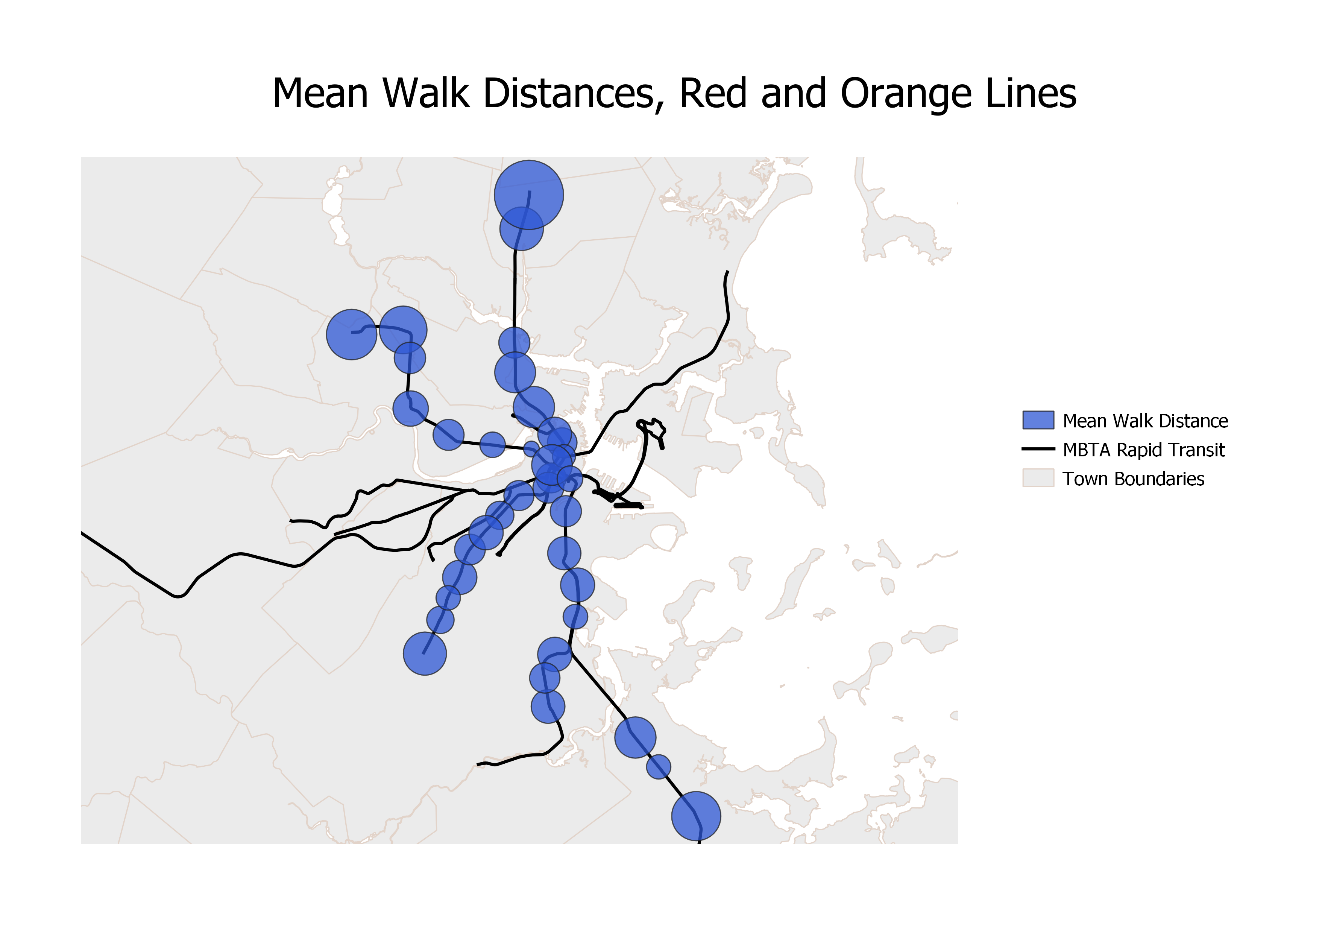 An image of the mean walk distances for the Red and Orange Lines. Walk distances are longer on the terminals.